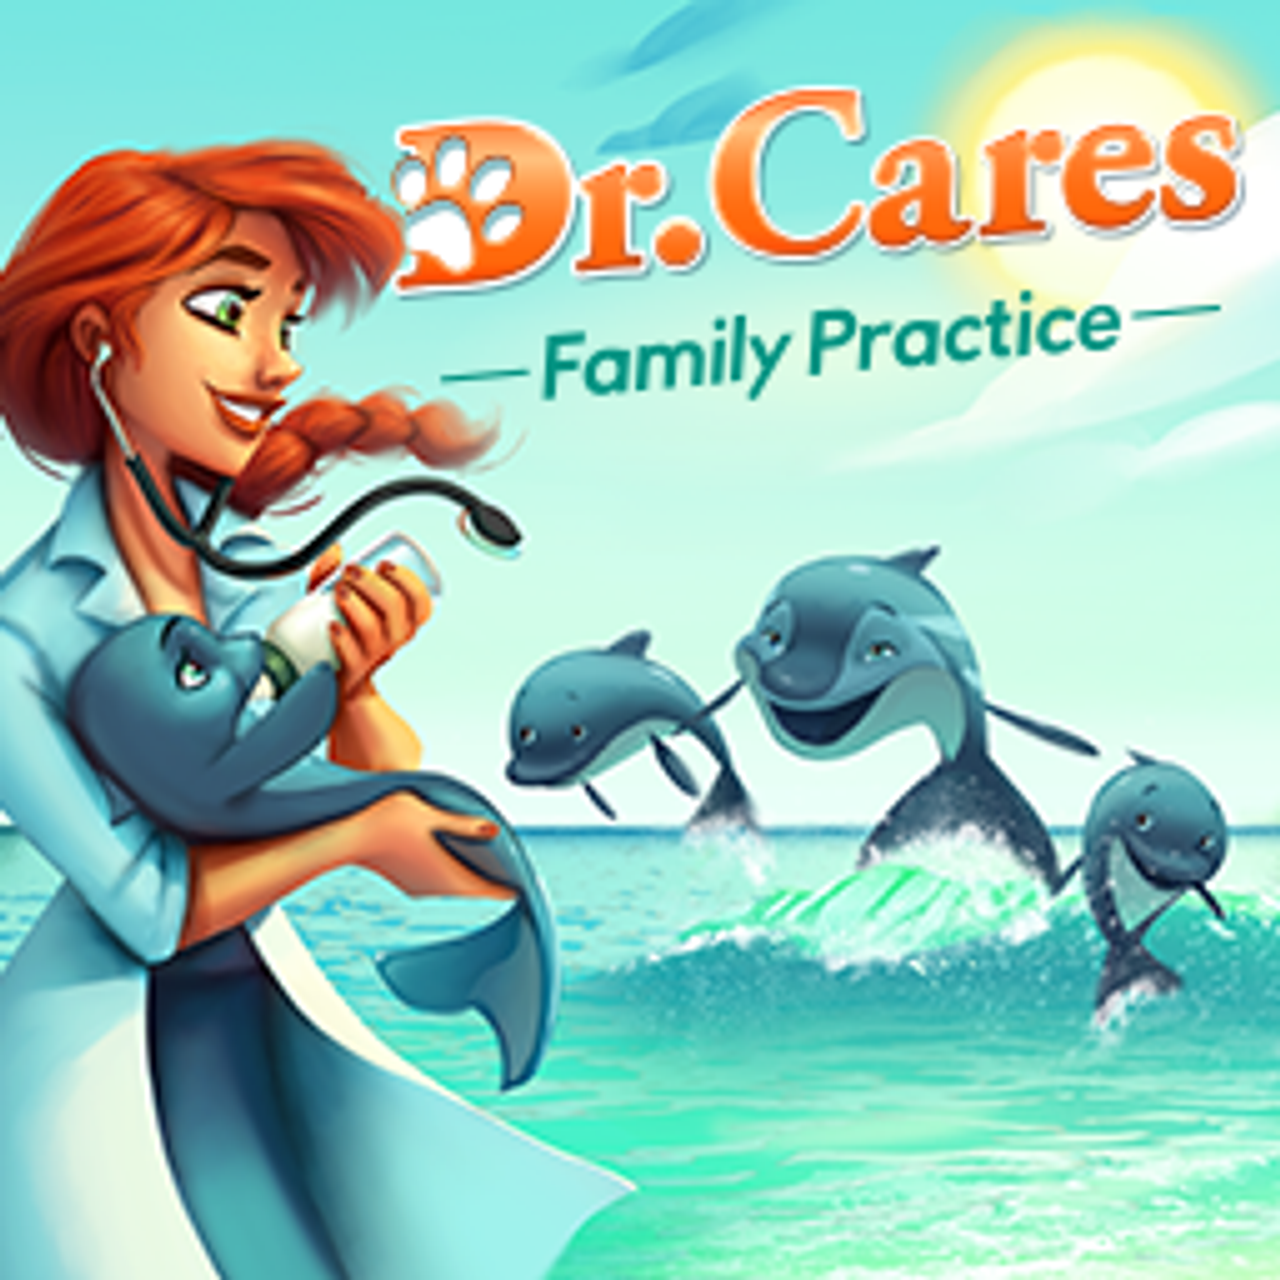 Dr. Cares: Family Practice